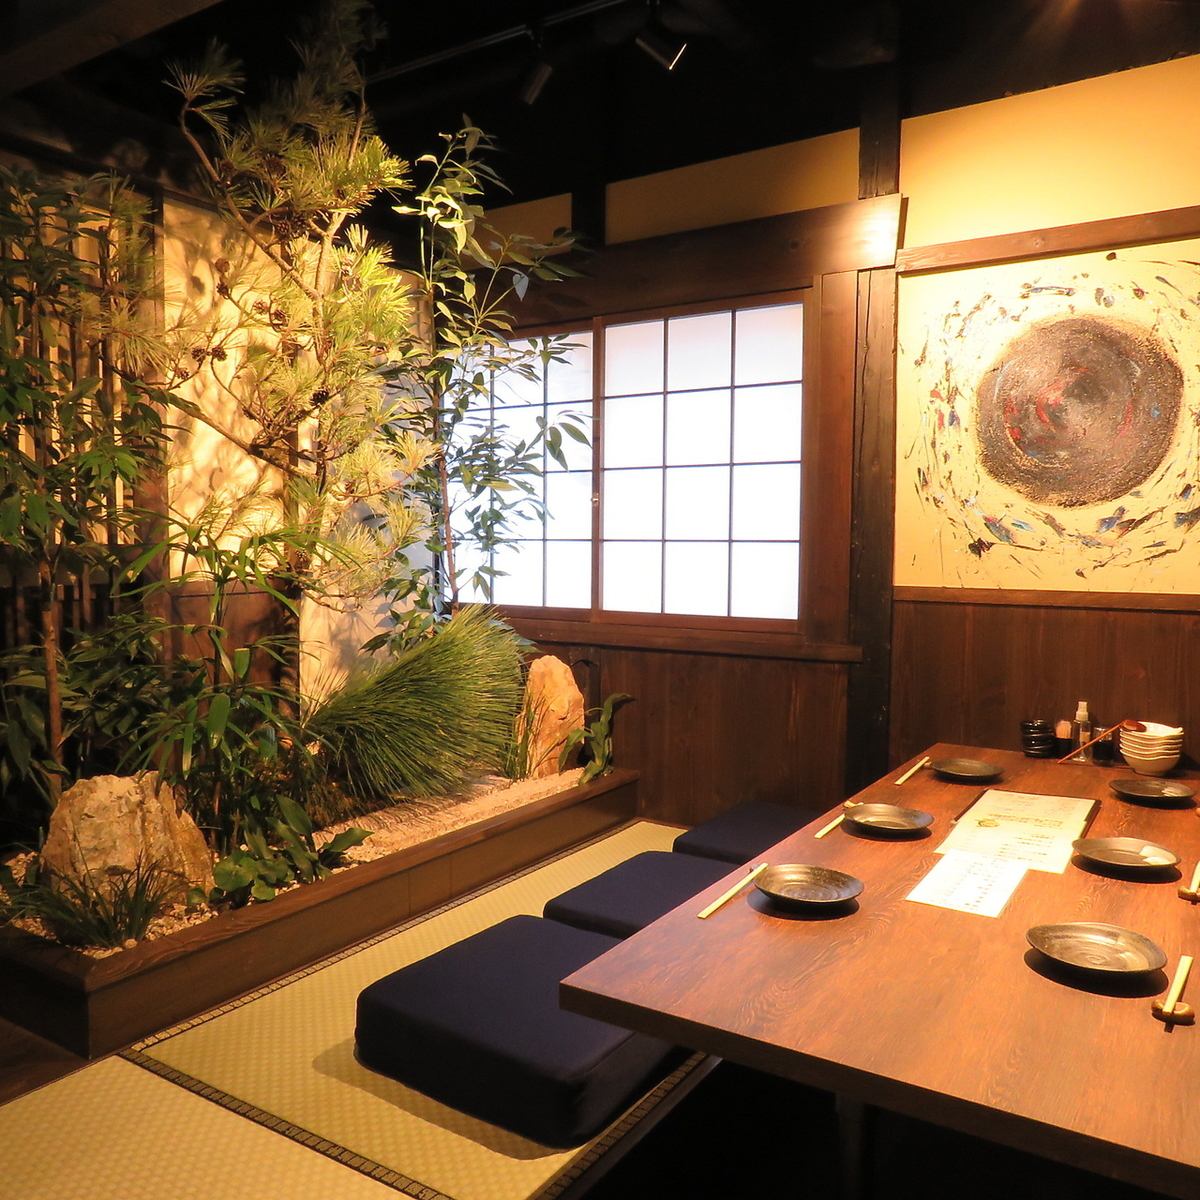 Private rooms available! Cheers to an izakaya where you can feel the atmosphere of Kyoto!